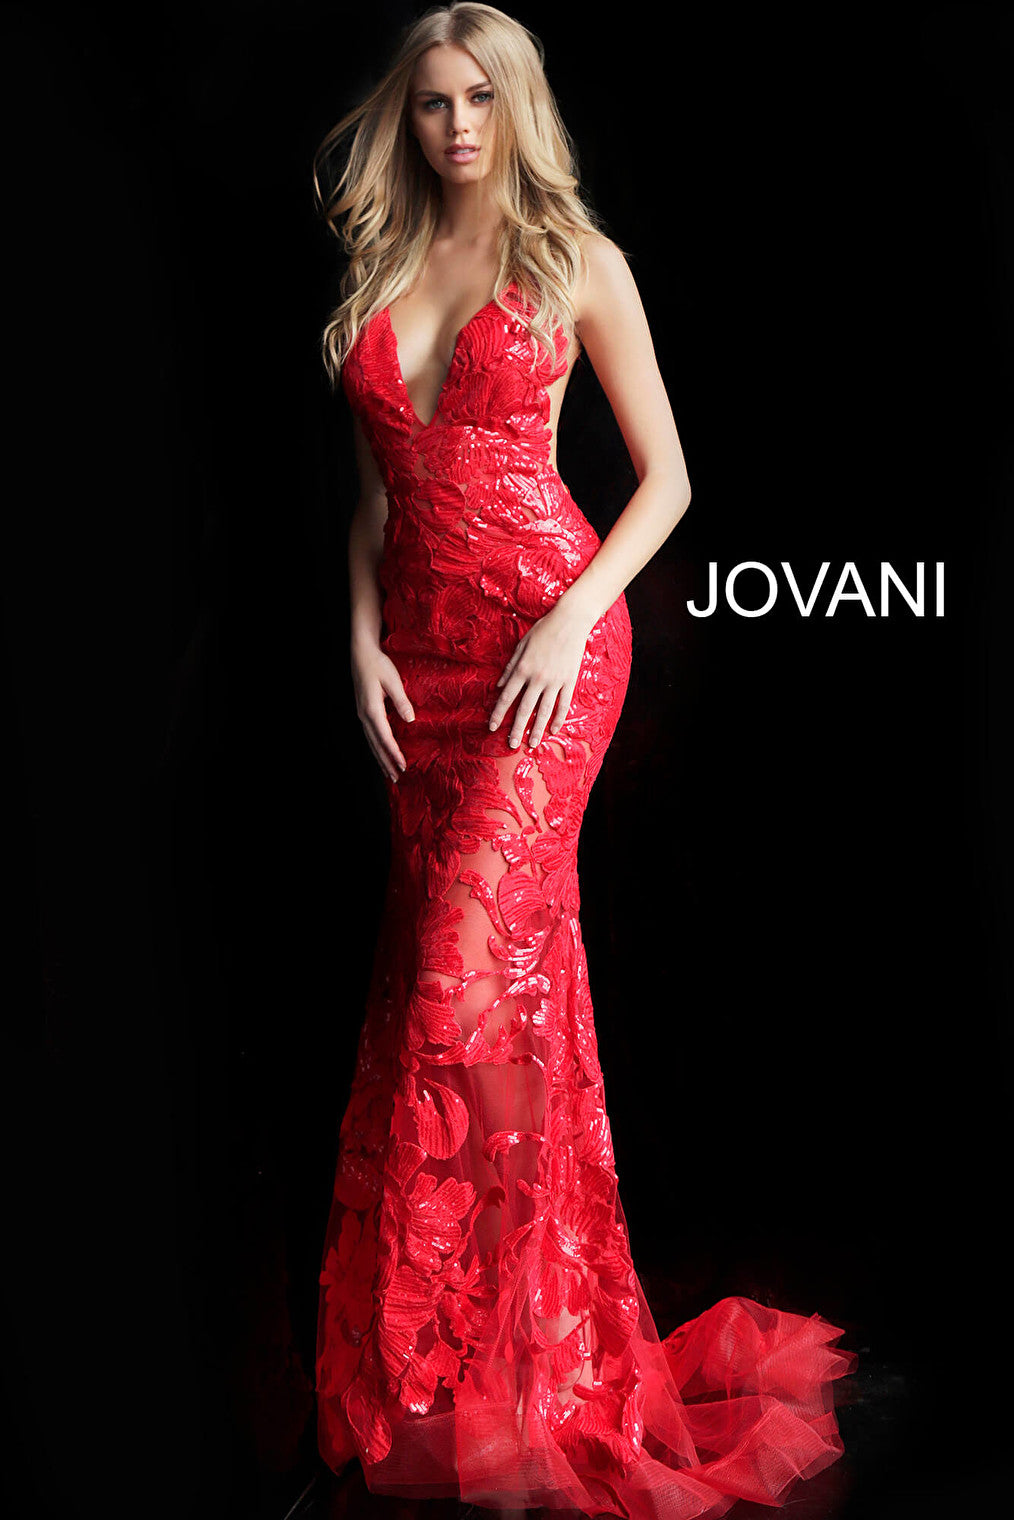 Jovani red plunging neck sequin prom dress 60283